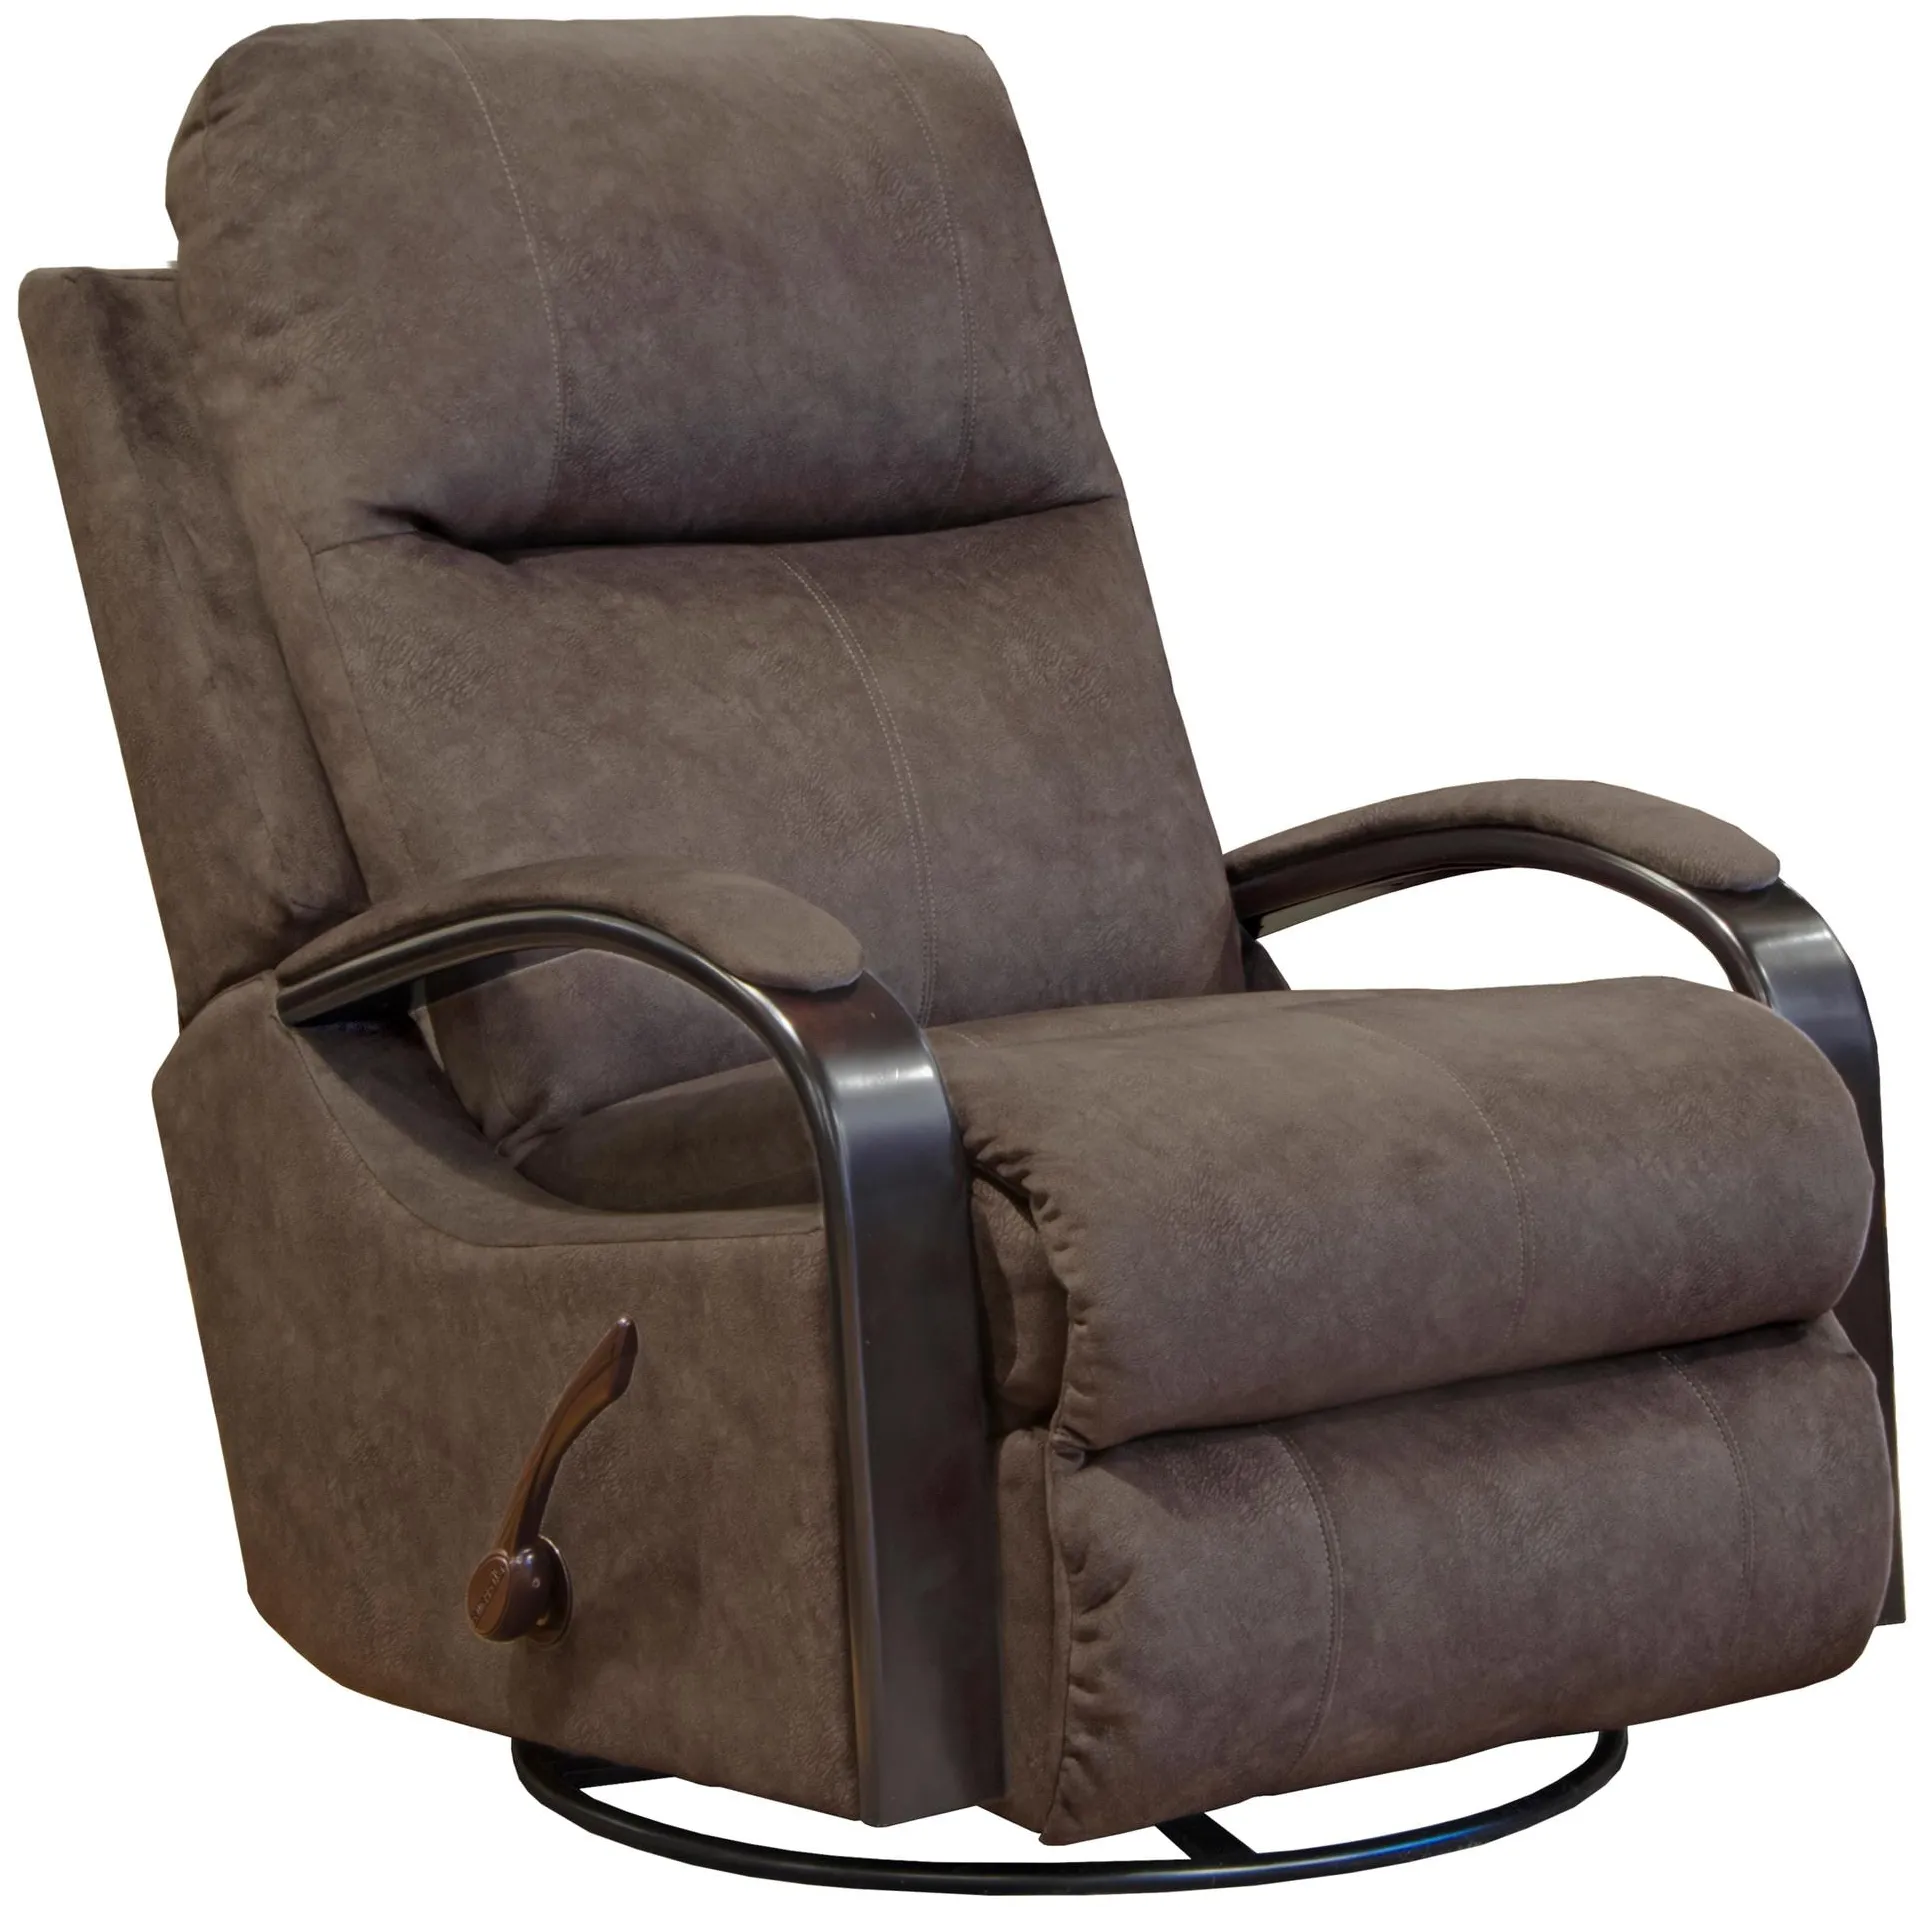 Giles Swivel Glider Recliner in Chocolate